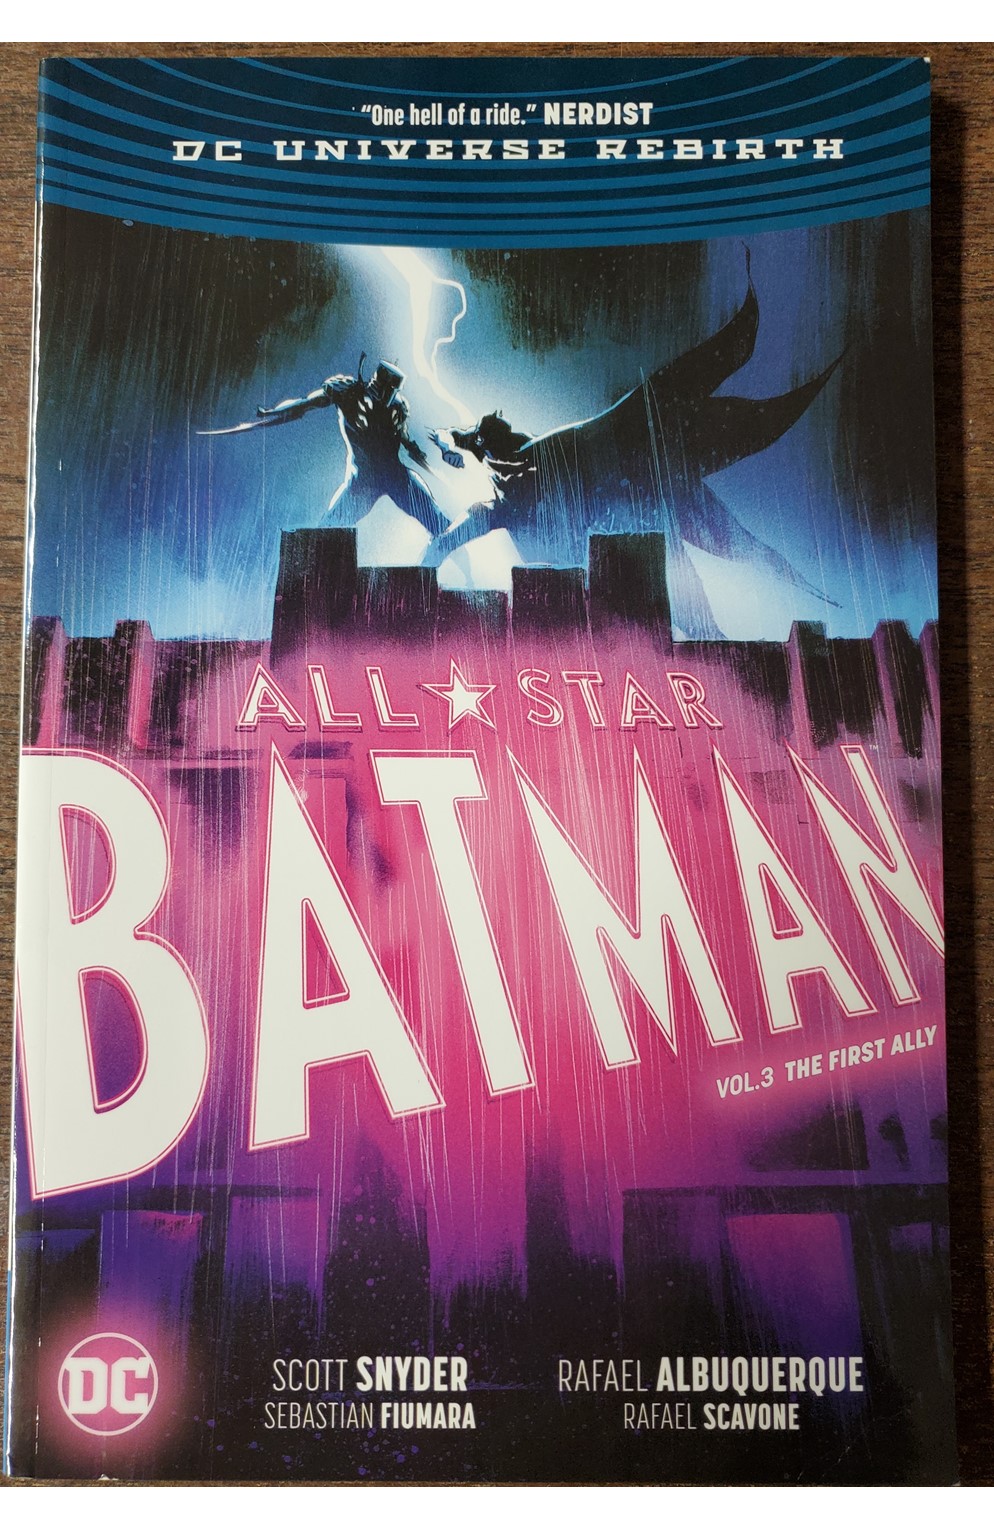 All Star Batman Volume 3 The First Ally Graphic Novel (DC 2018) Used - Like New